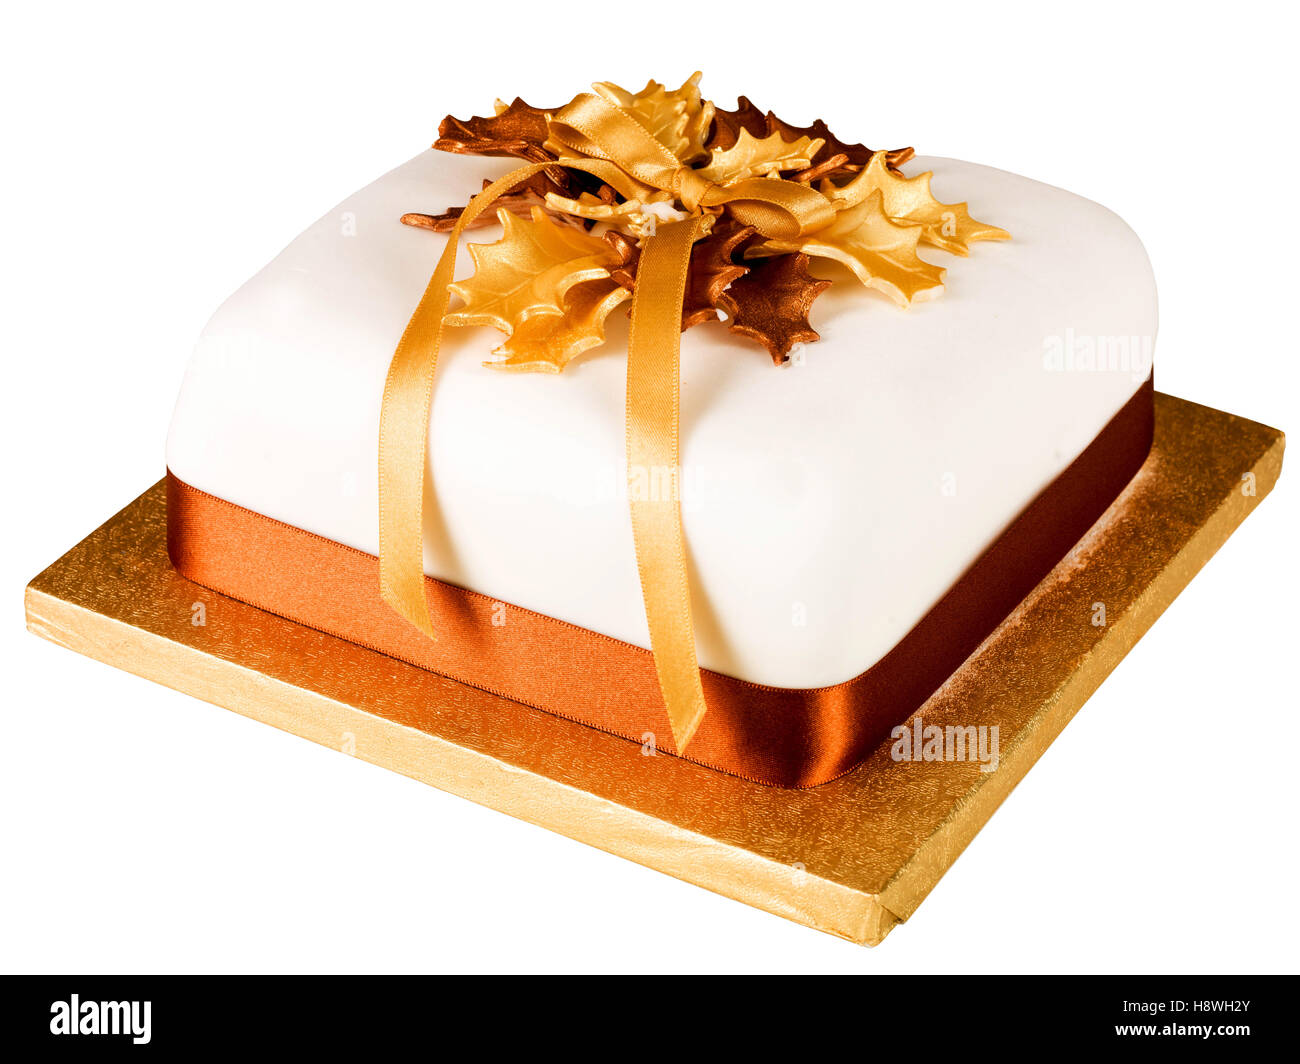 Traditional Authentic Iced and Decorated Rich Fruit Christmas Cake With Gold Ribbons And Holly On A Cake Board With No People Ready To Eat Stock Photo